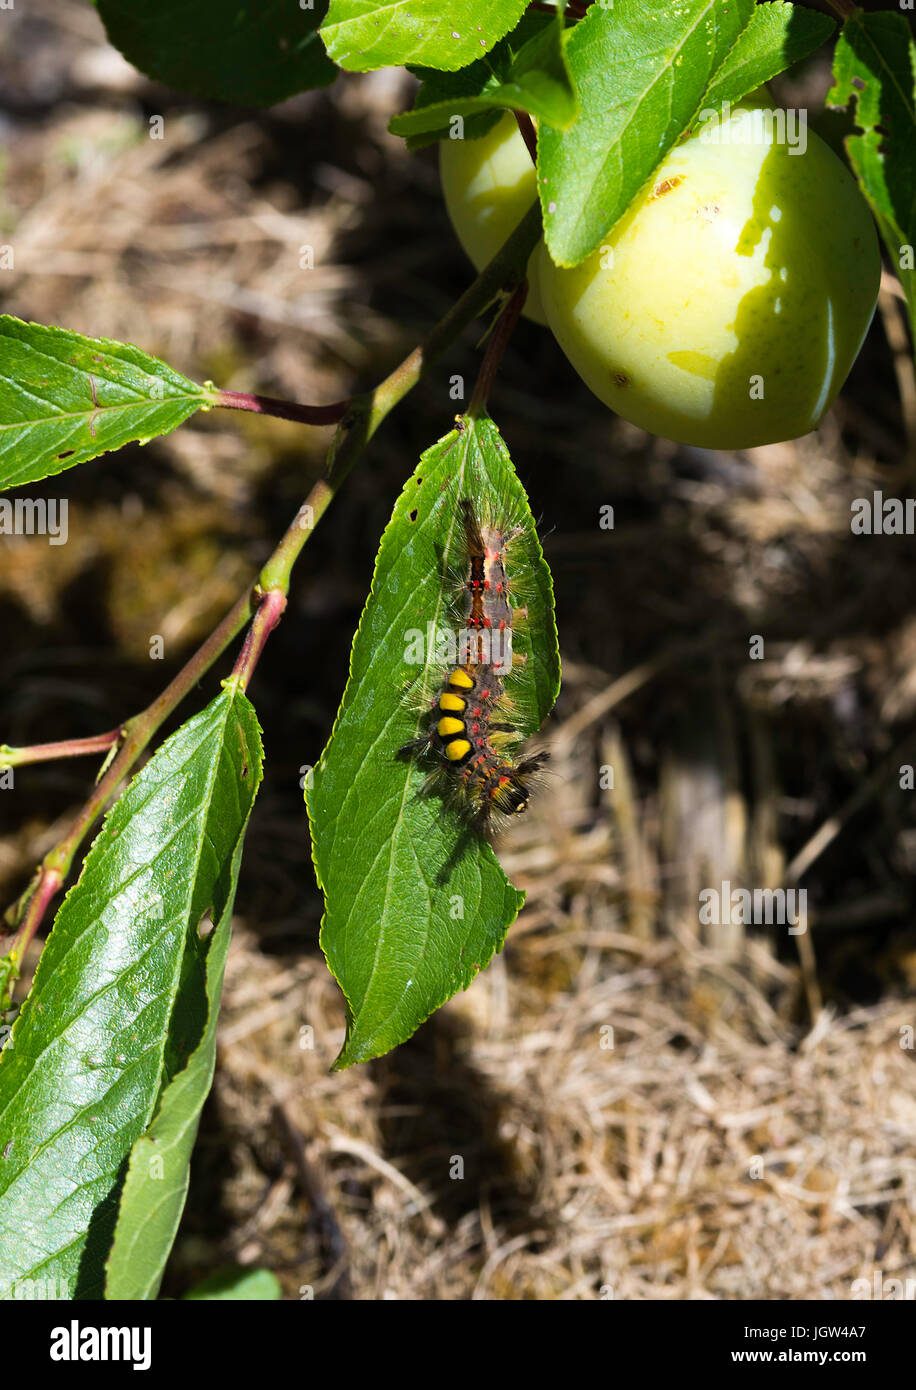 A Vapourer Moth [Rusty Tussock Moth] Caterpillar Feeding on a Plum Tree Leaf in a Garden in Oxfordshire England United Kingdom UK Stock Photo